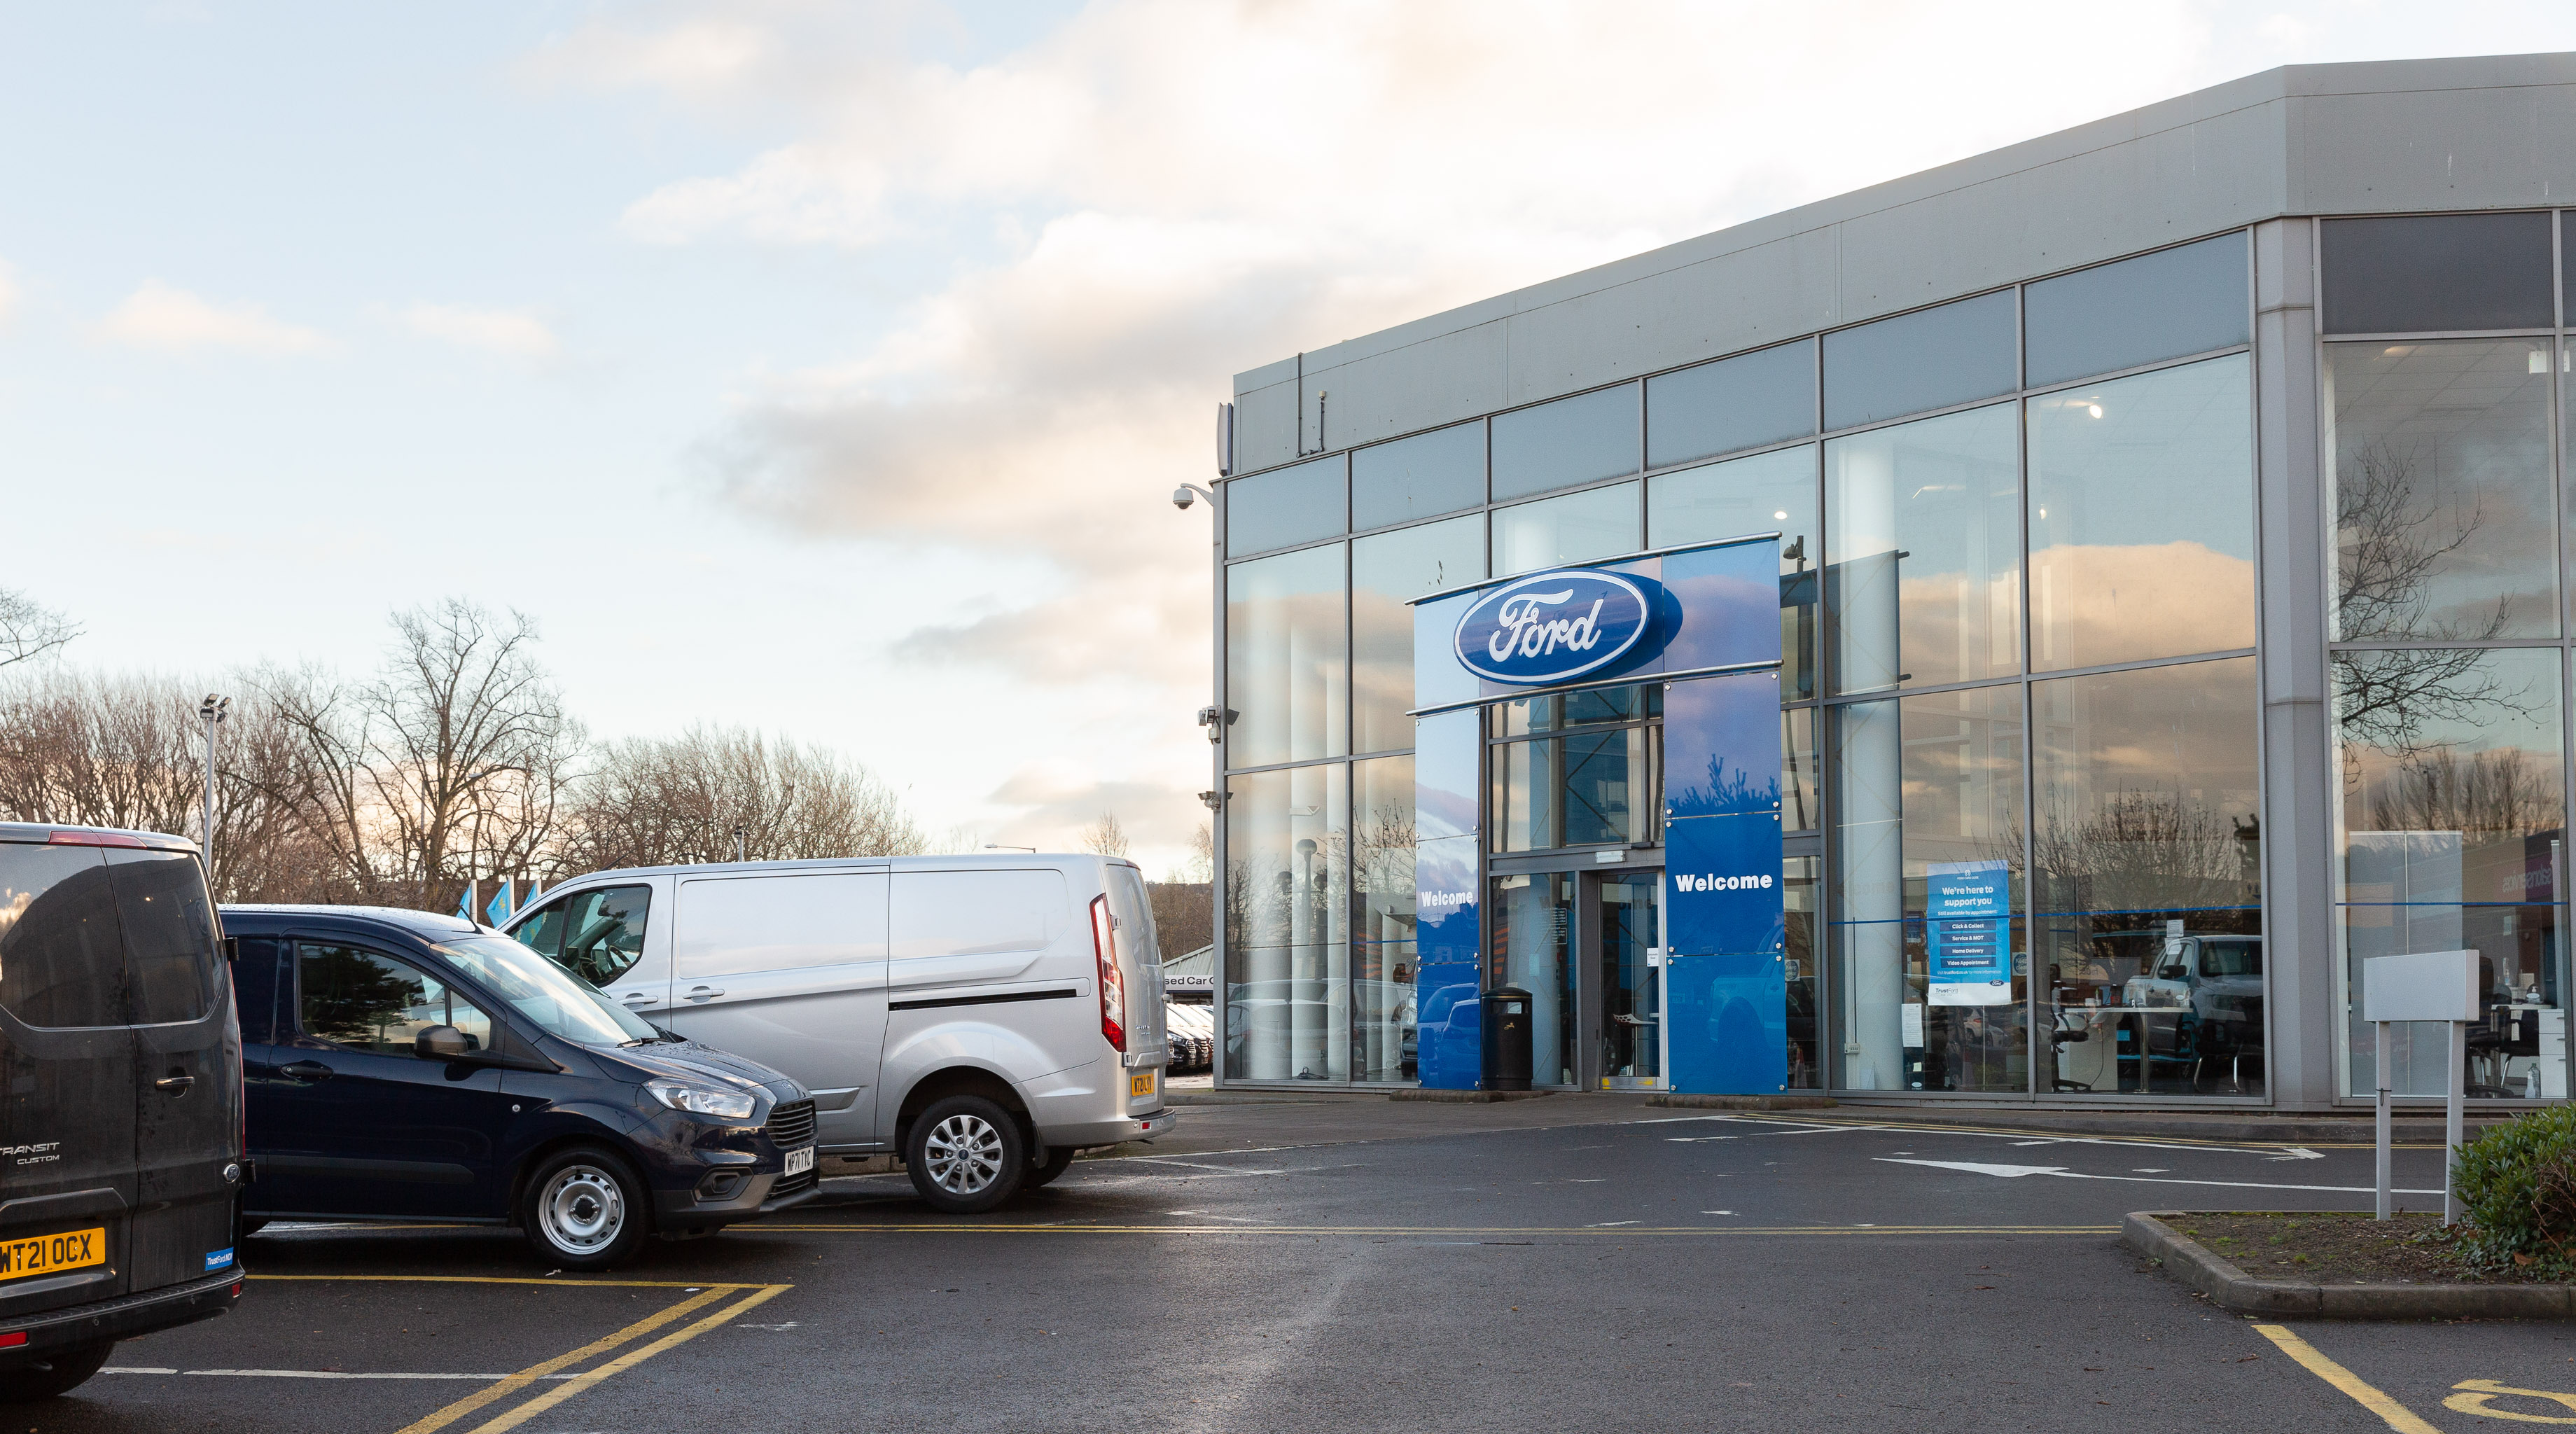 Ford
Trust Ford. I came here to look into buying a Fiesta last time I was looking for a new car. Nobody seemed remotely interested in selling me a car,...